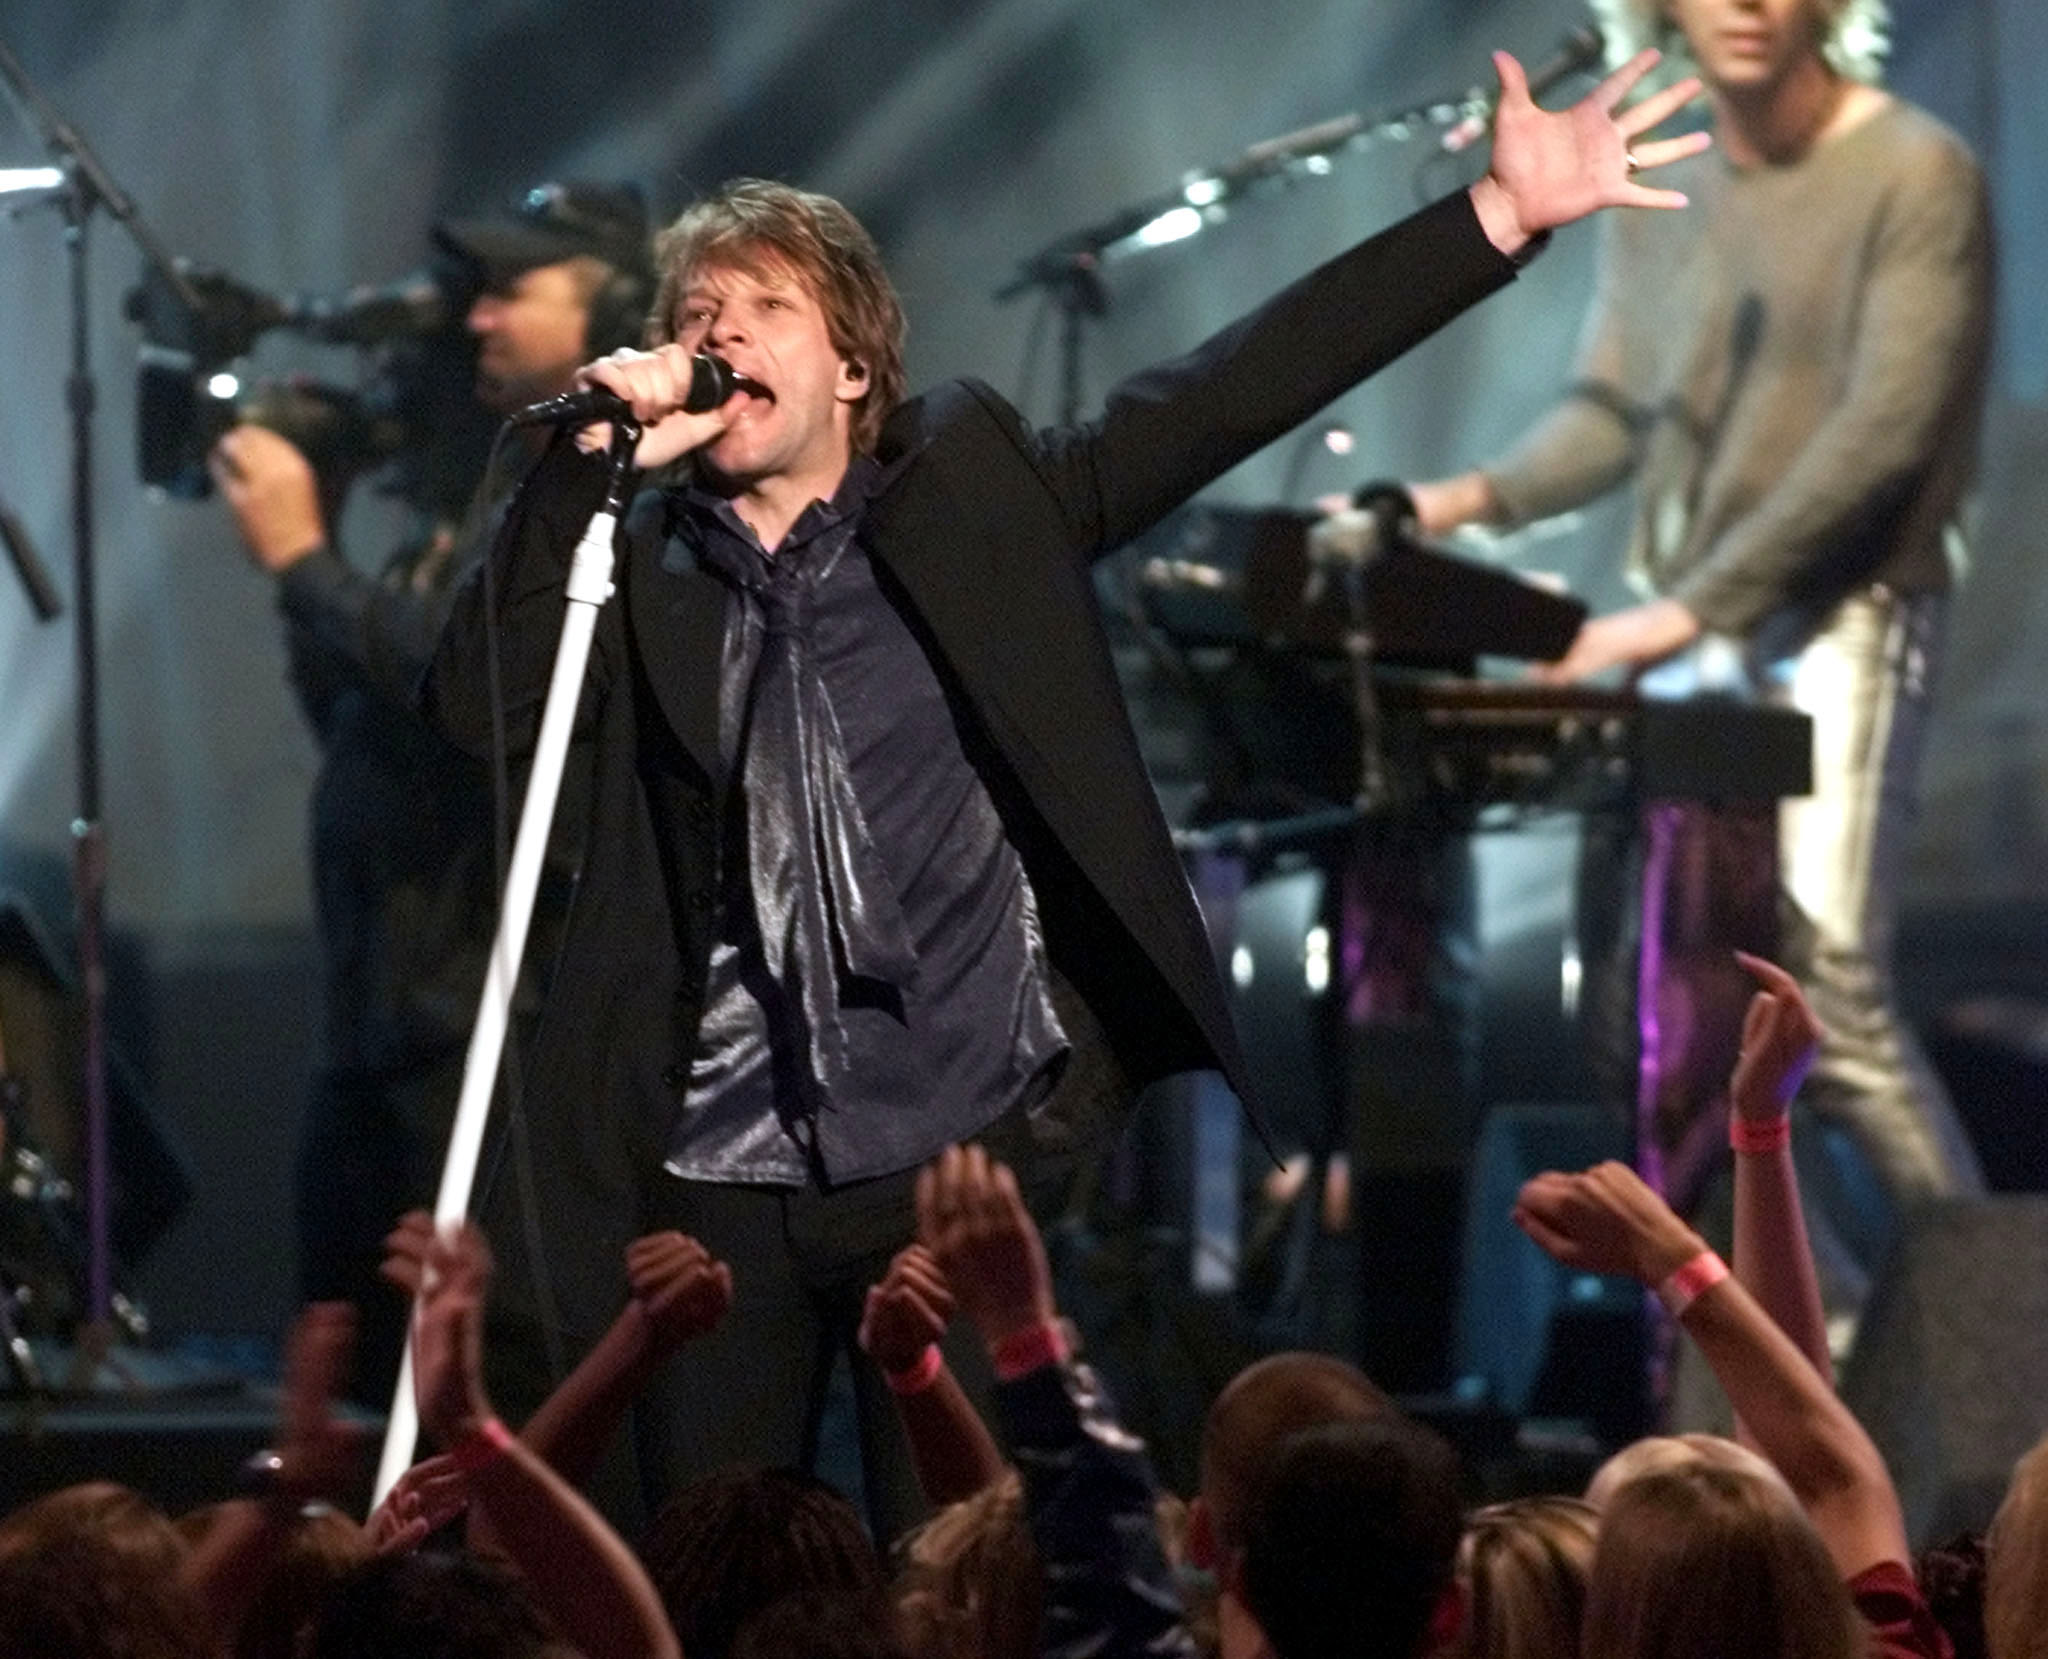 Jon Bon Jovi, lead signer of the group "Bon Jovi," performs "It's My Life" at the first My VH1 Awards November 30, 2000 in Los Angeles. VH1 viewers voted for their favorite singers and groups via the Internet during the awards show which was telecast live on the VH1 cable network. FSP/SV